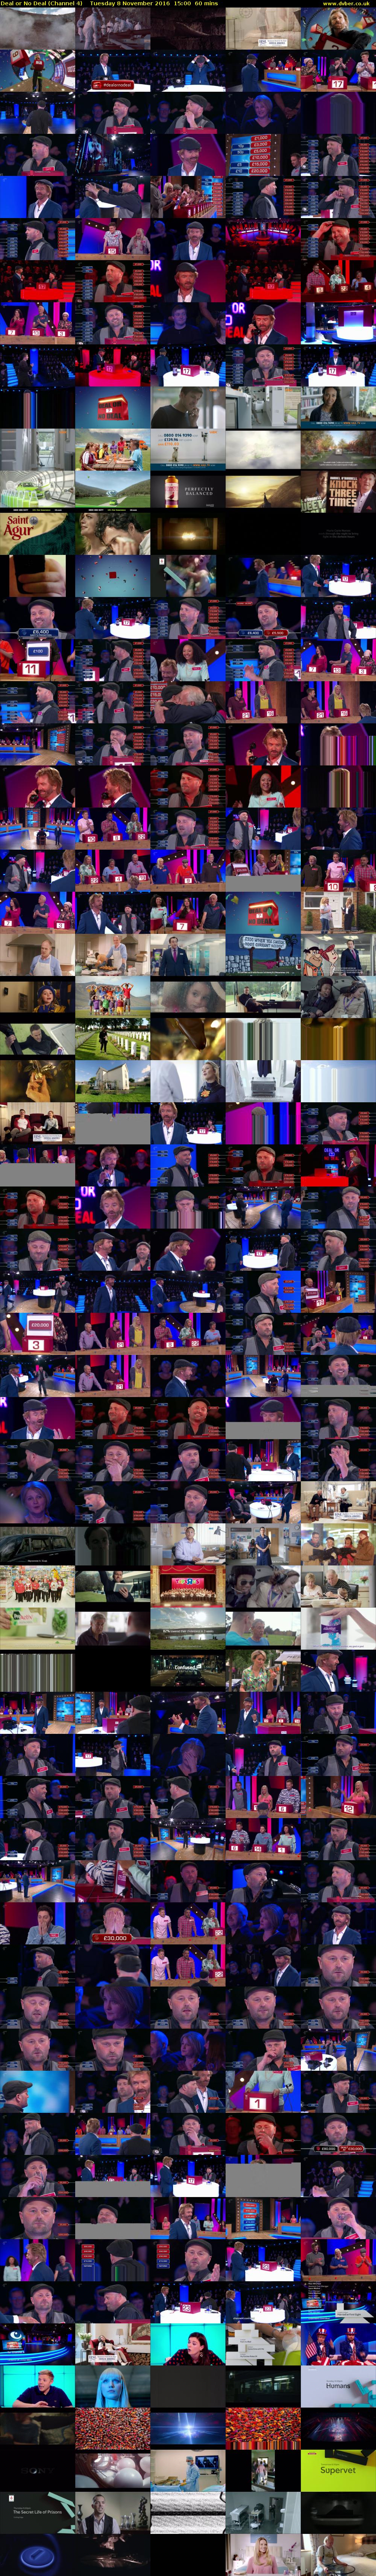 Deal or No Deal (Channel 4) Tuesday 8 November 2016 15:00 - 16:00